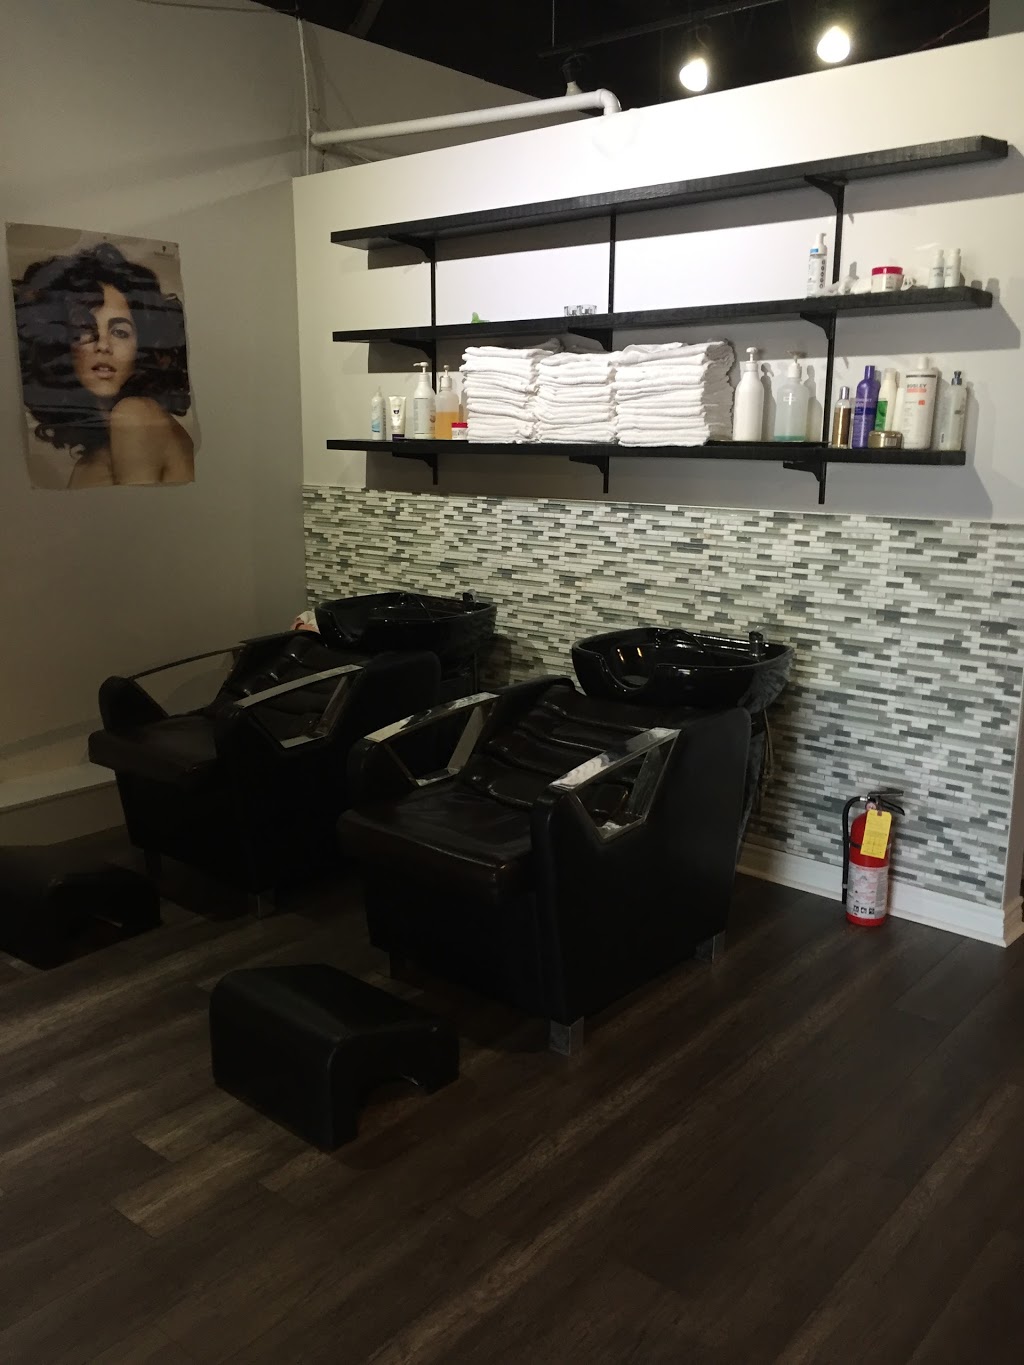 Babalon Hair Design | 184 Guelph St, Georgetown, ON L7A 4A6, Canada | Phone: (905) 873-0004